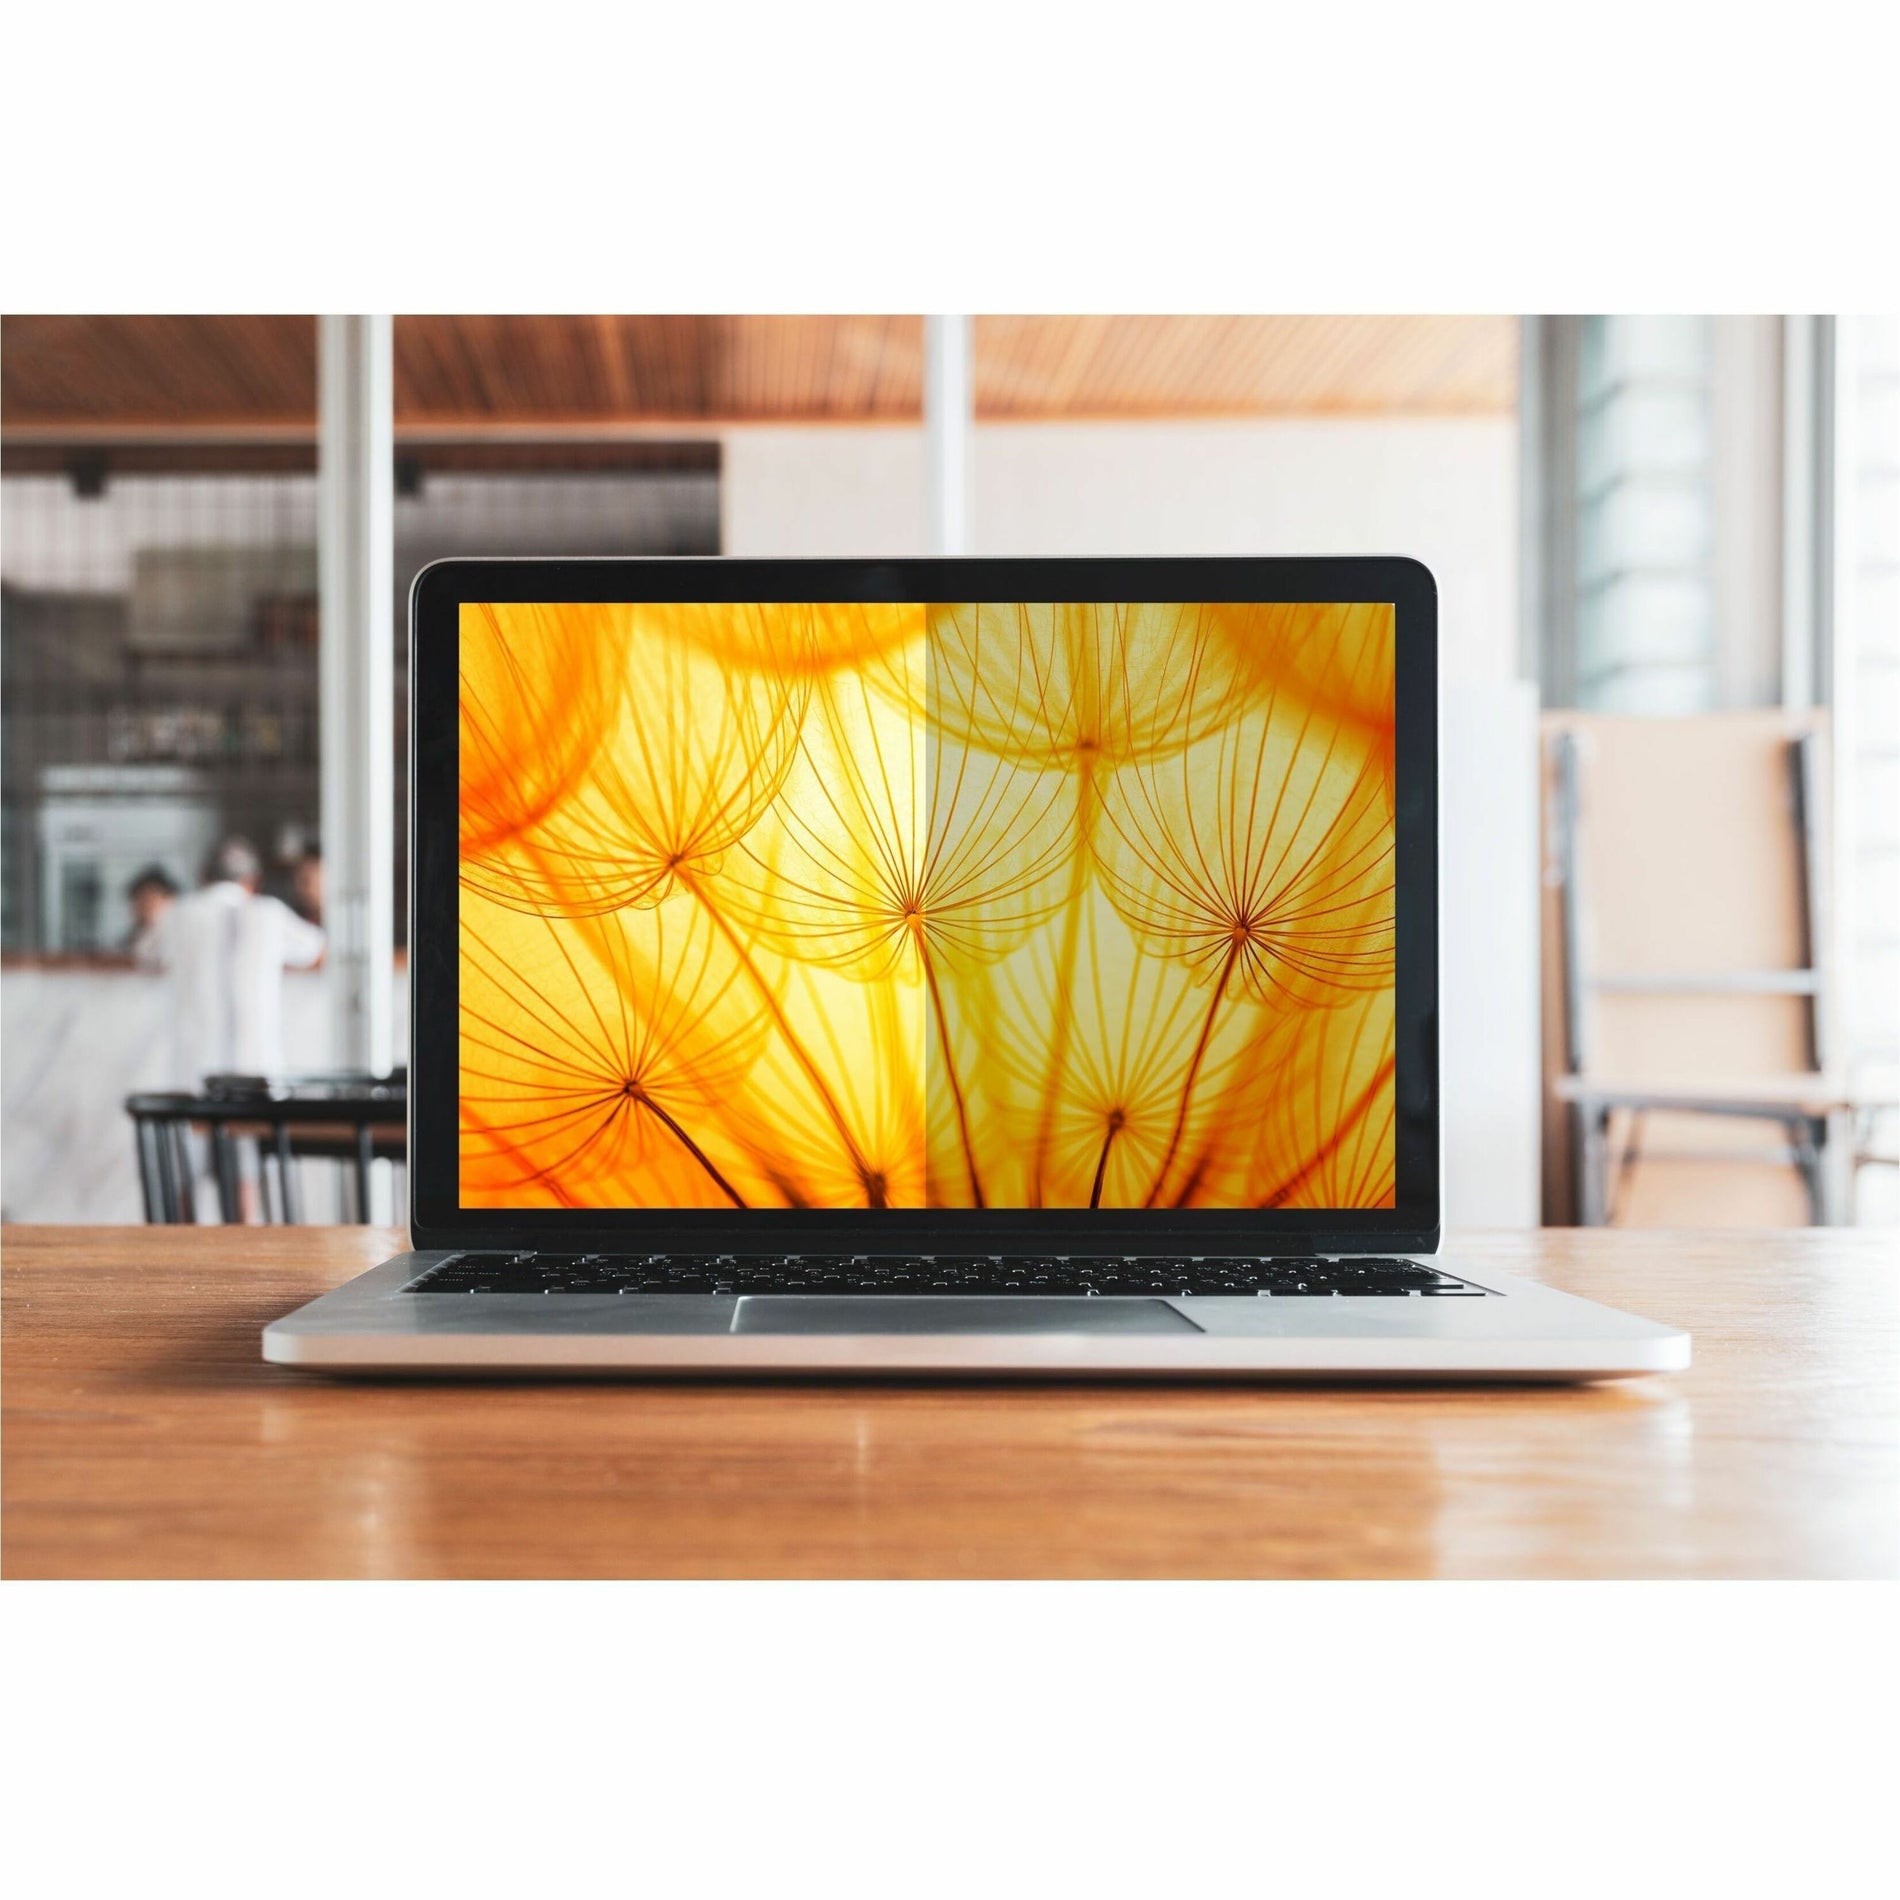 3M BPNAP001 Bright Screen Privacy Filter for Apple MacBook Air 13 2018-20, 16:10, Ultra Slim, Easy to Apply, Reversible Matte-to-Glossy